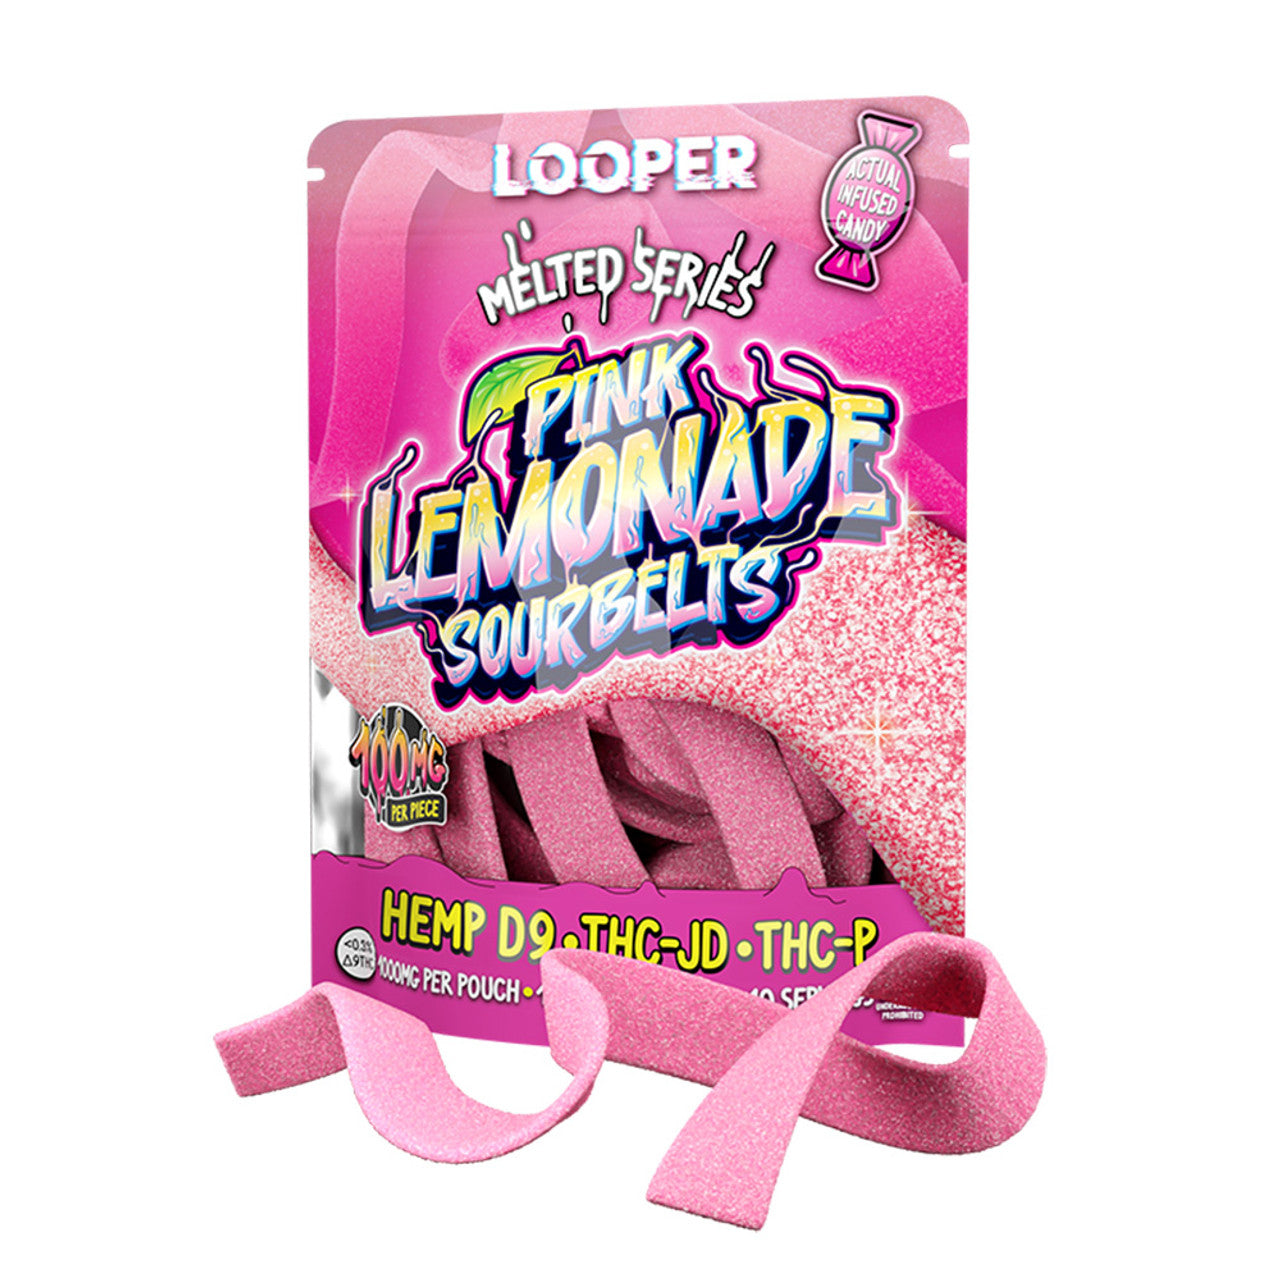 Looper Melted Series D9/THC-JD/THC-P 1000mg Sour Belts - Sky High West Chester